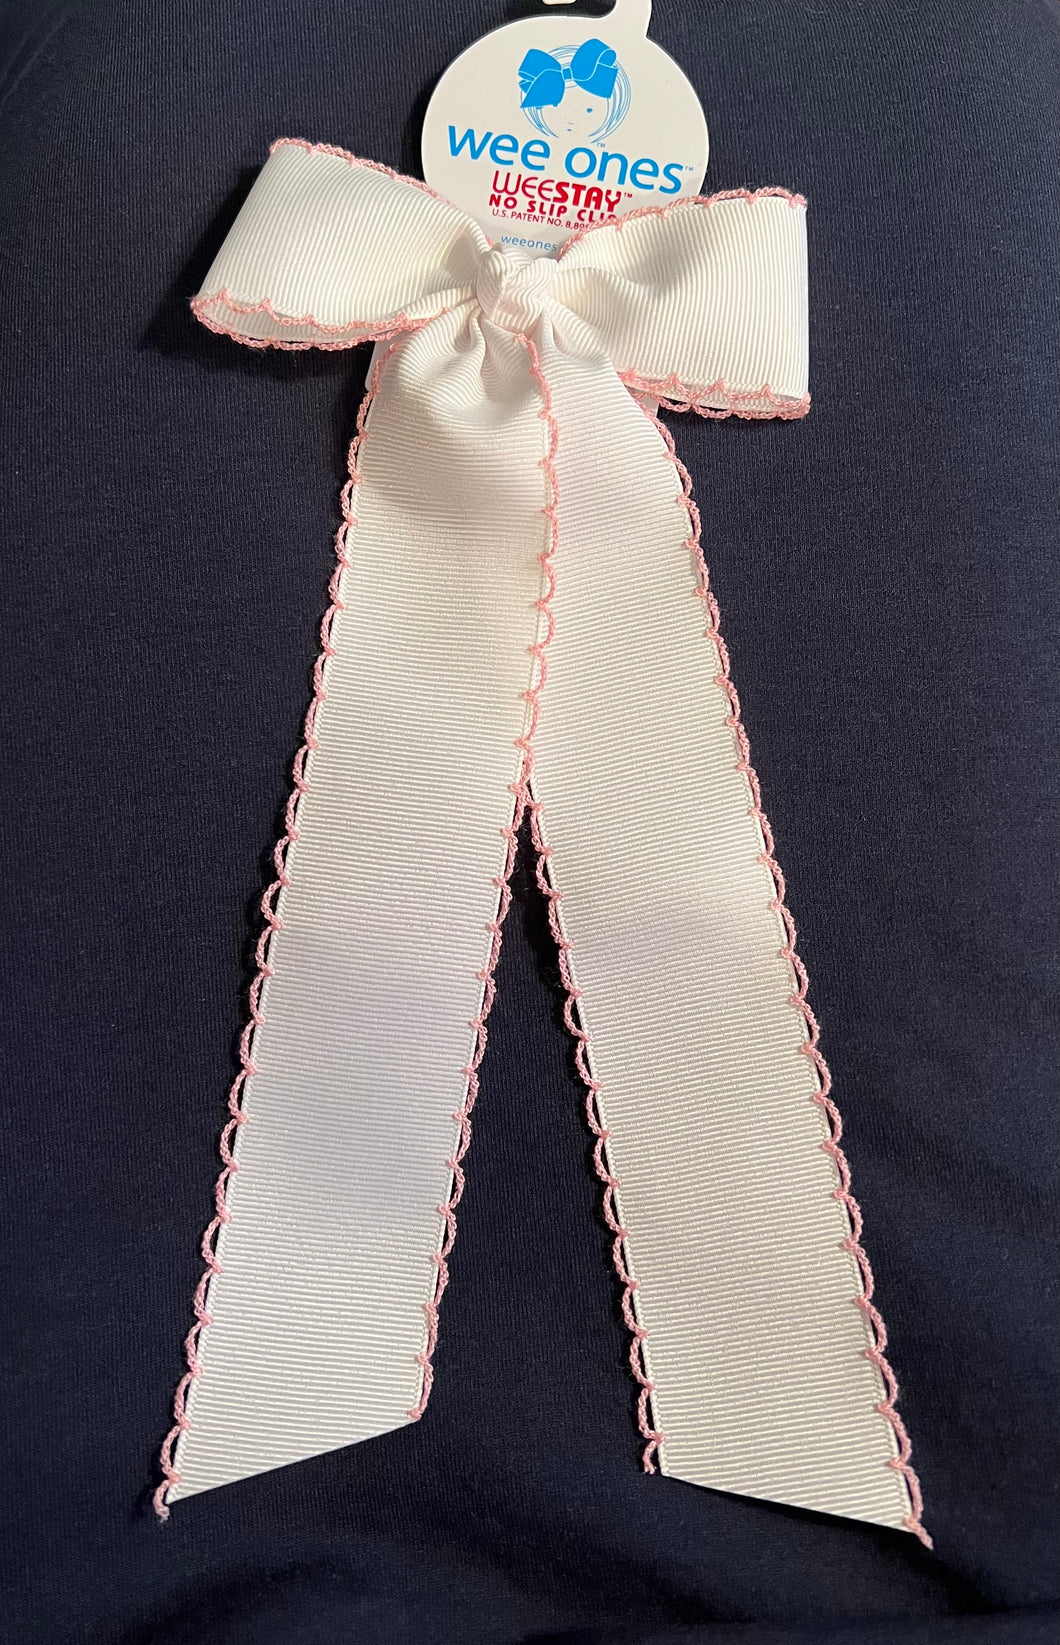 Moonstitch Bowtie with Streamer Tails - White w/ Light Pink